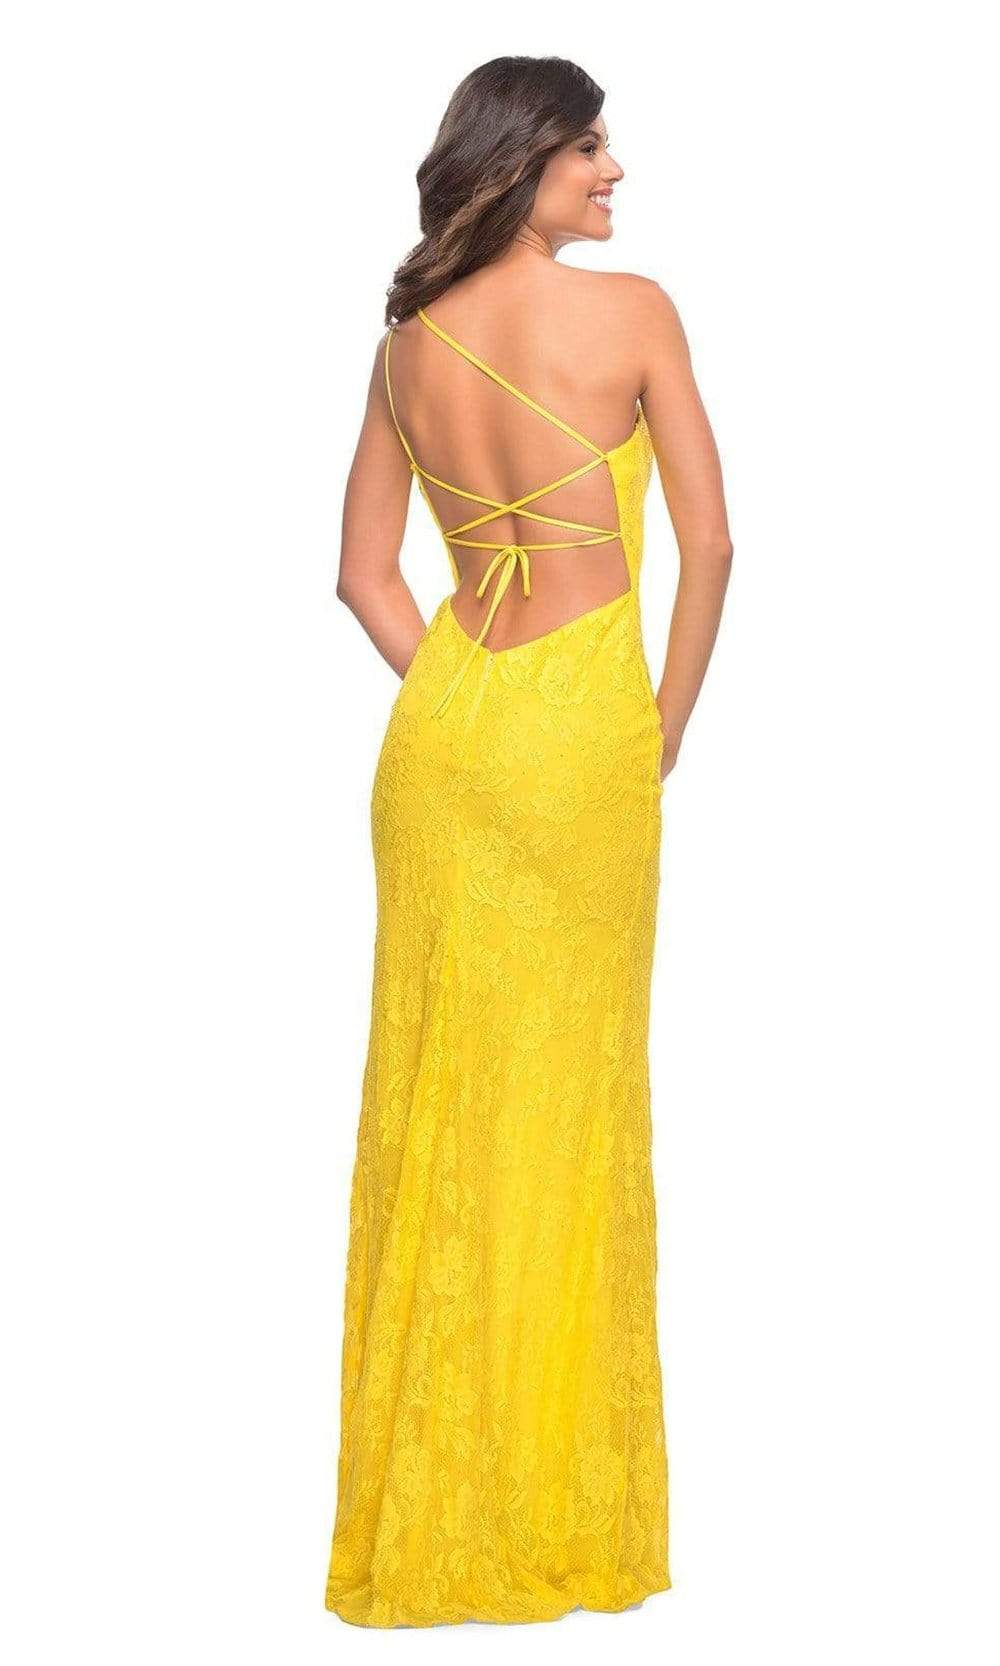 La Femme - 30441 Strappy Back Lace Gown Special Occasion Dress